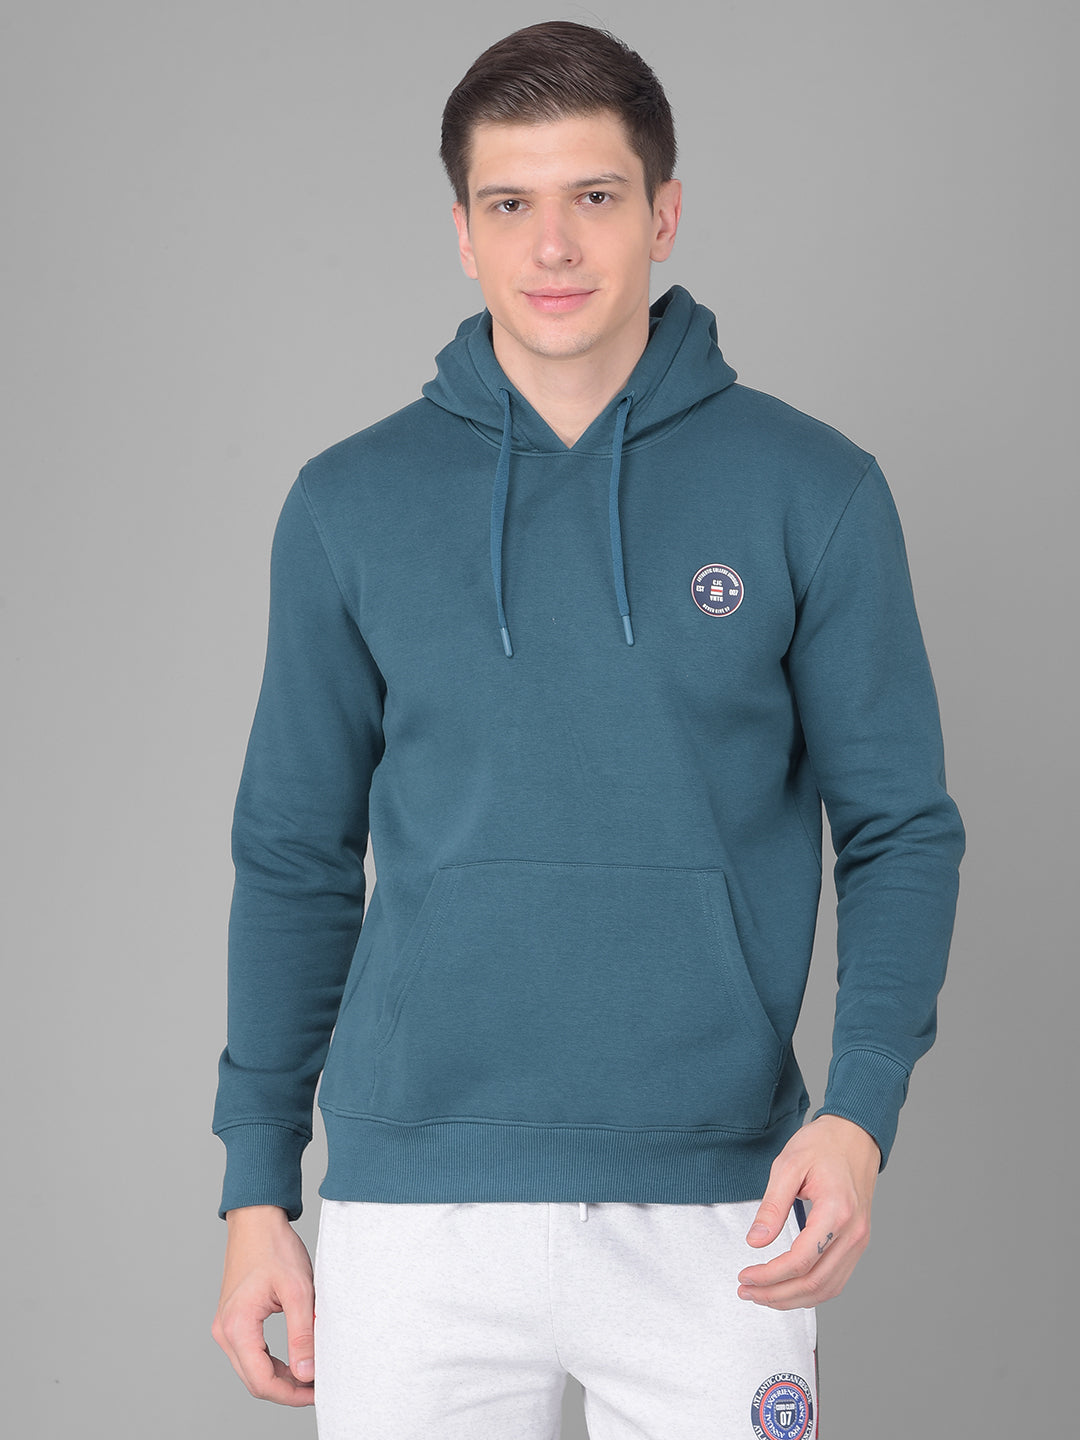 COBB SOLID TEAL CLASSIC HOODIE